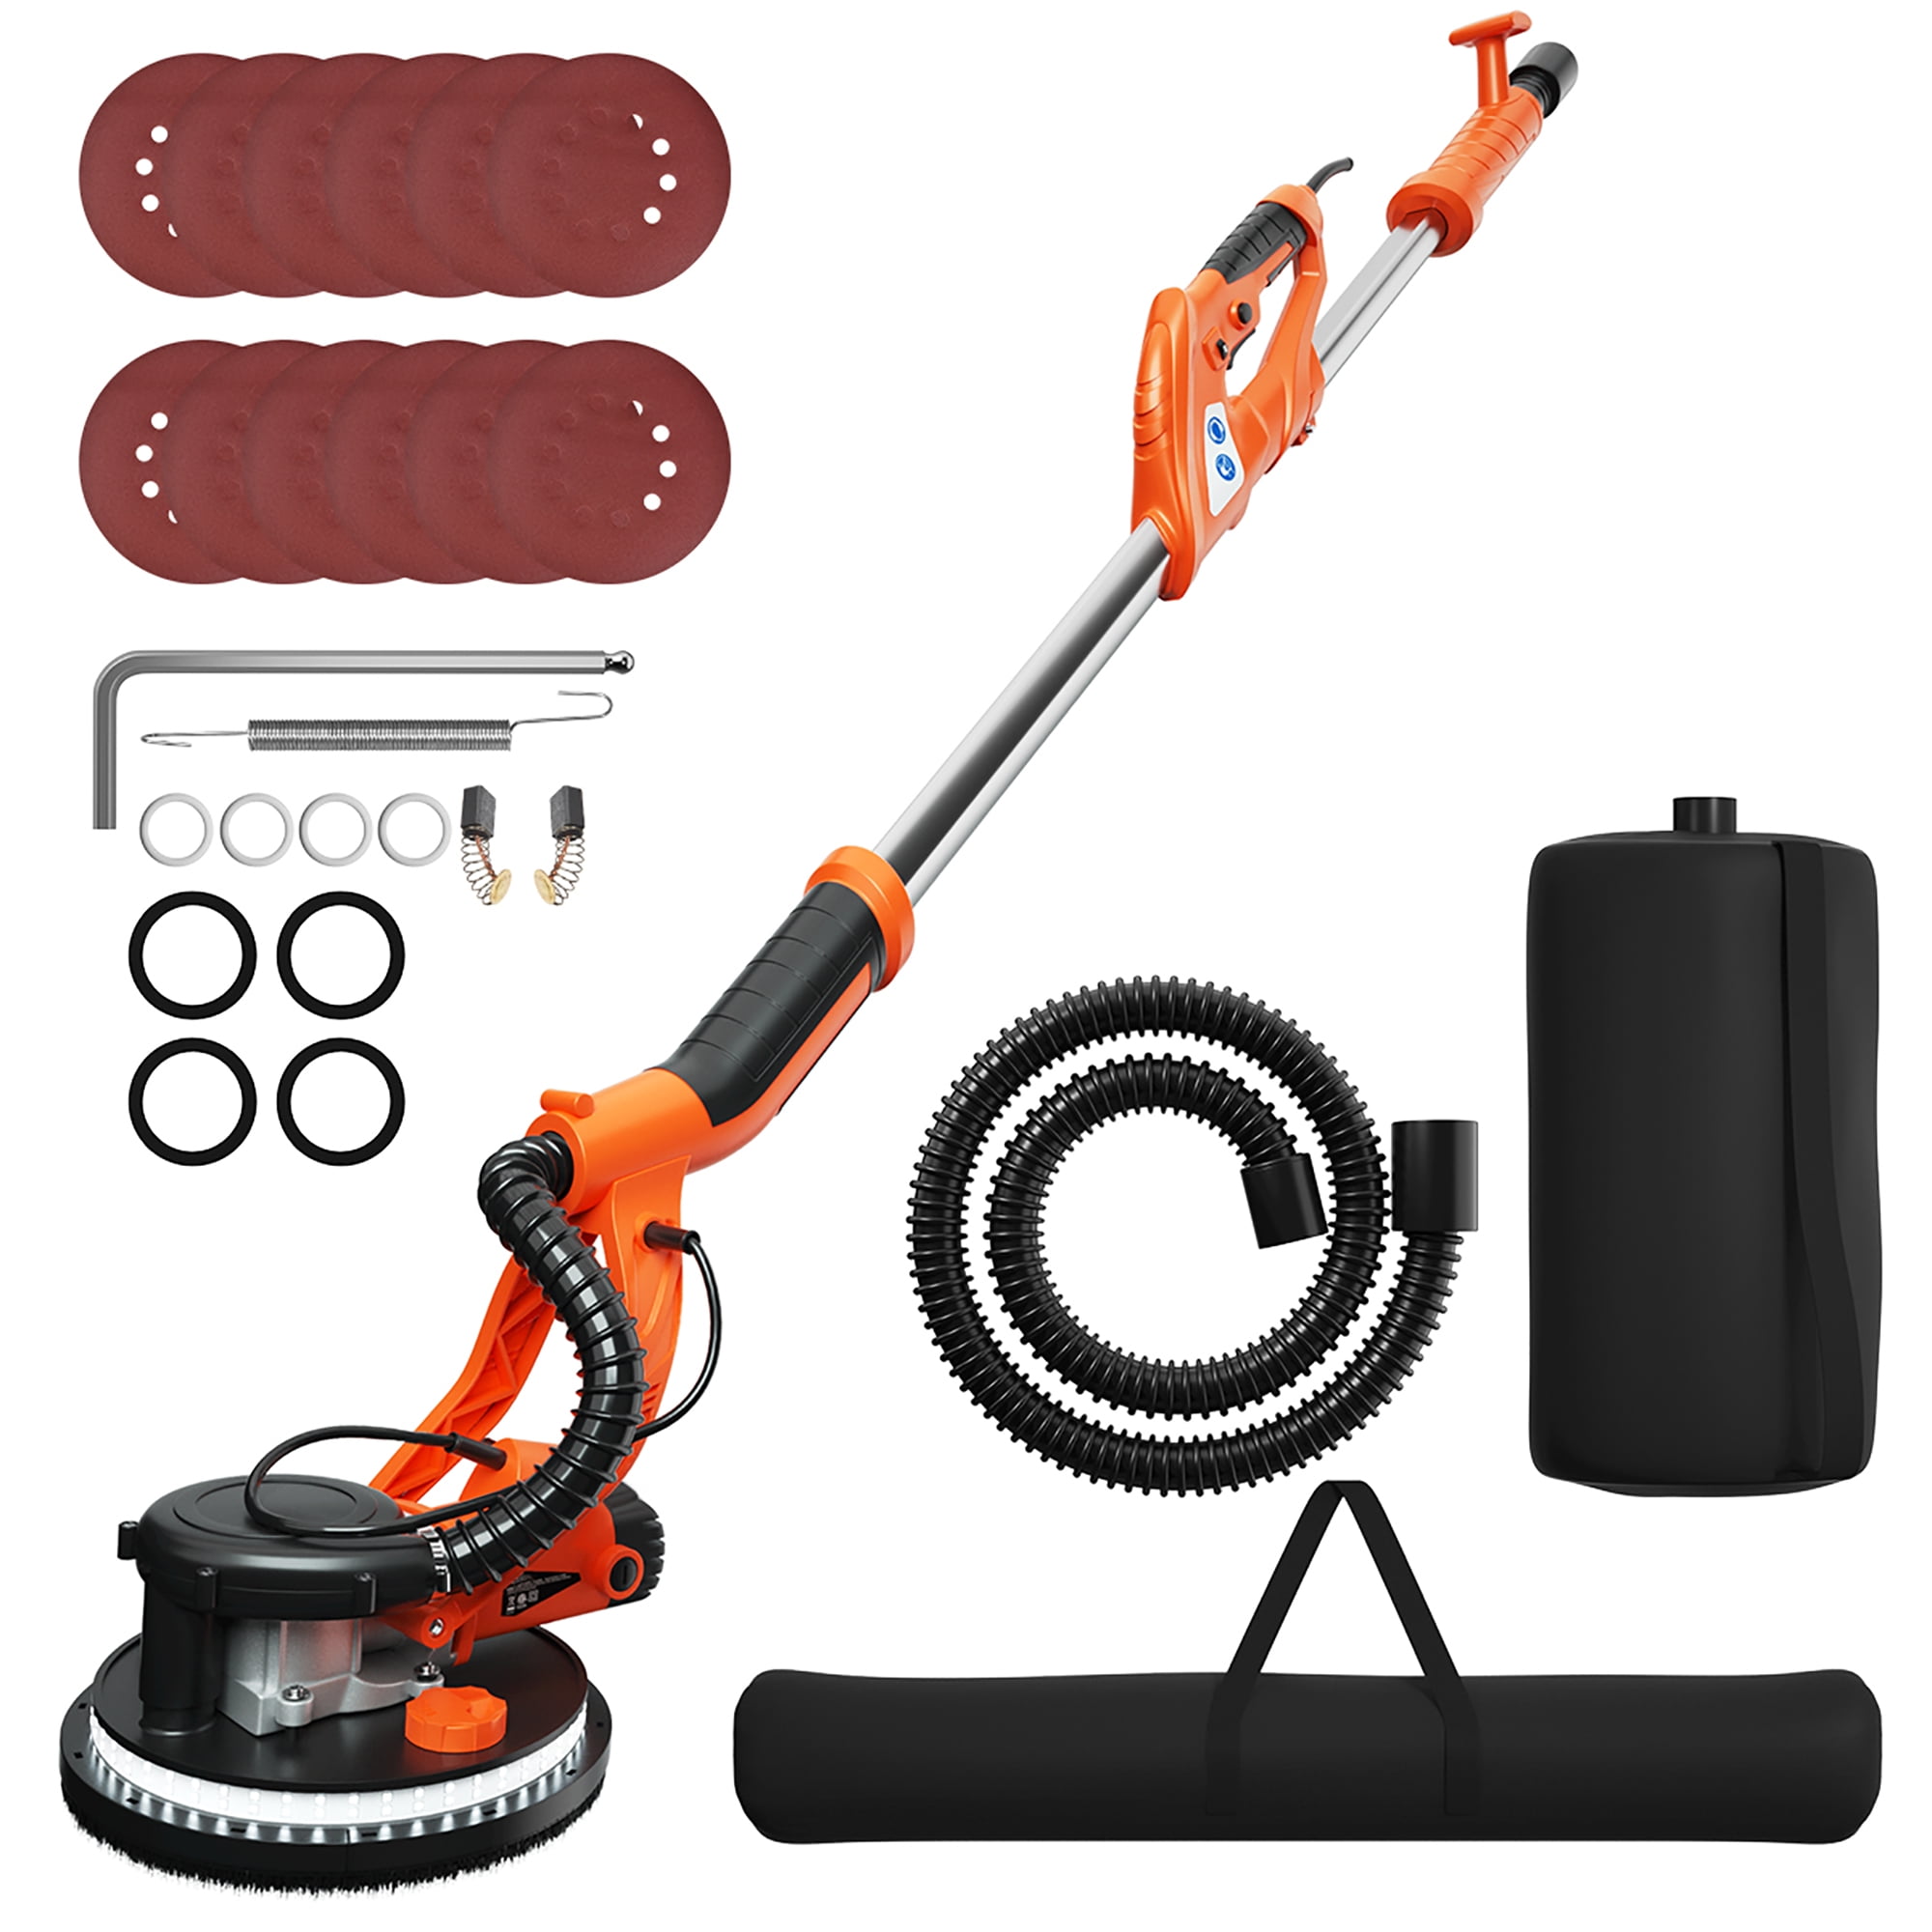 Costway Electric Drywall Sander 750W Adjustable Variable Speed w/ Vacuum and LED 